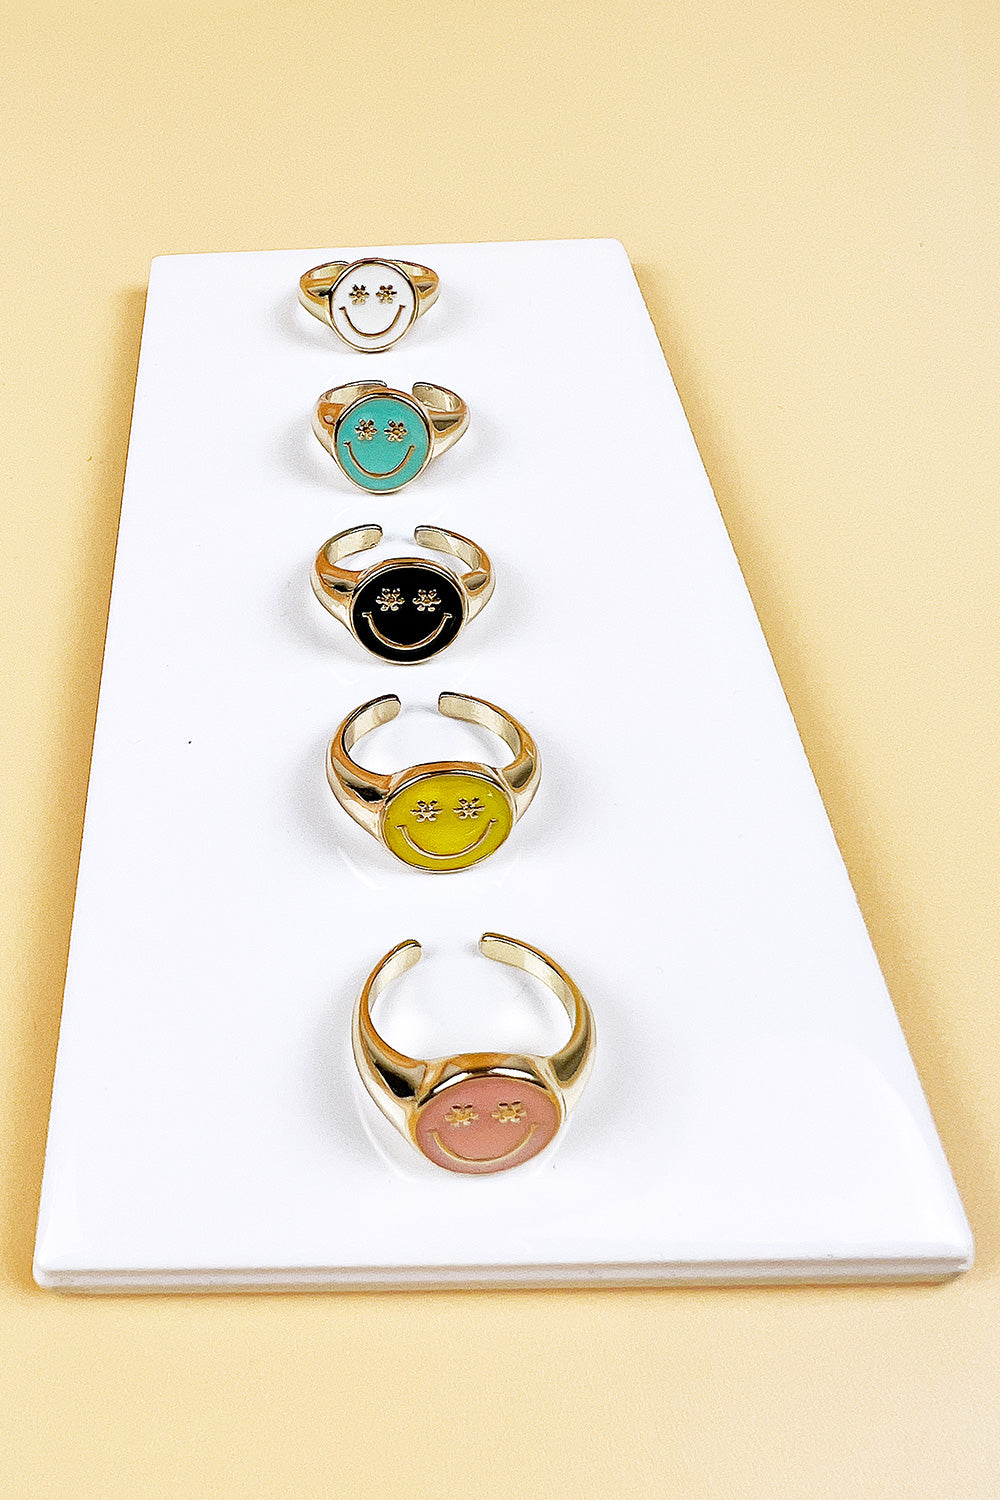 COLORFUL SMILE SHAPED ENAMEL OPEN RING